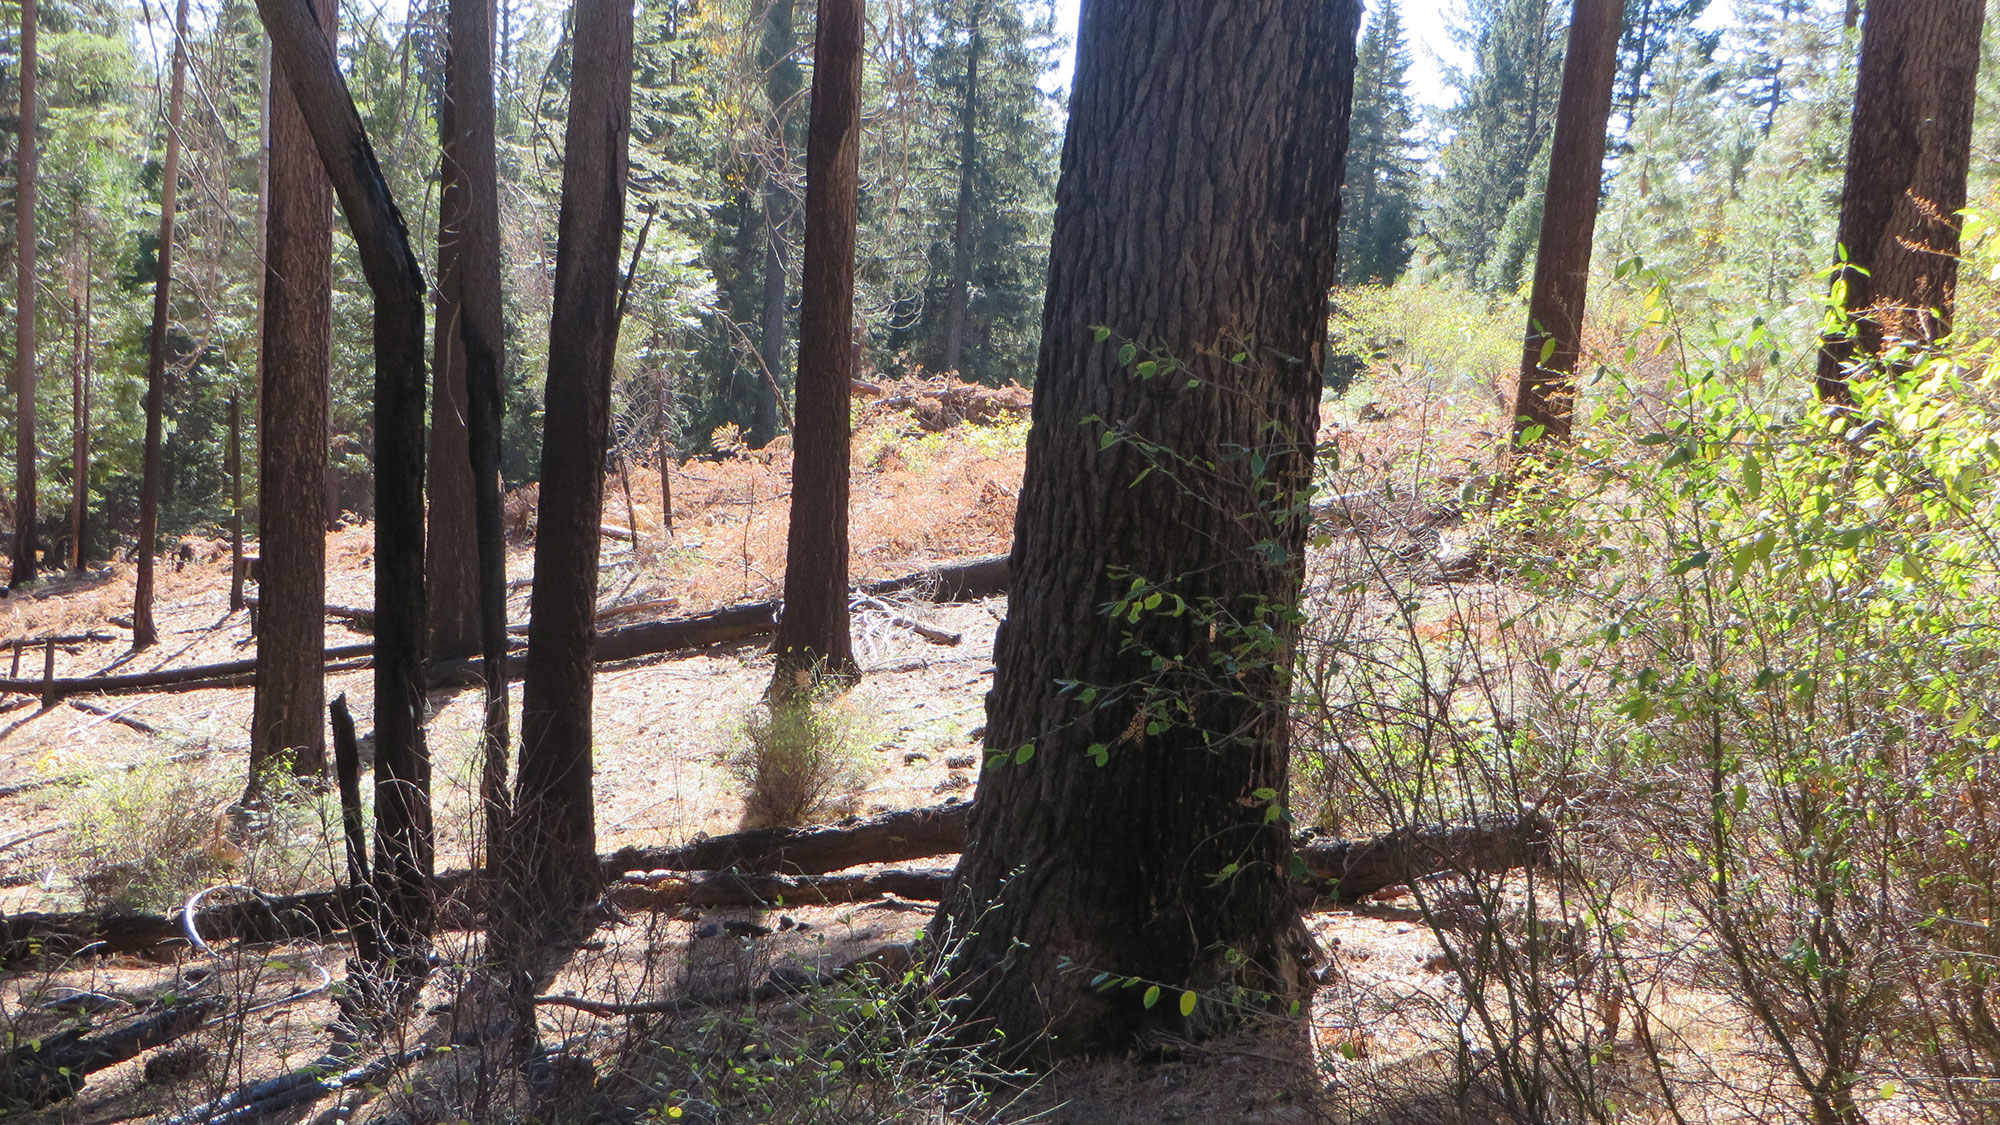 A photo of a portion of a conifer forest. The forest floor is relatively clear of debris and it is easy to see through the trees to other parts of the forest.